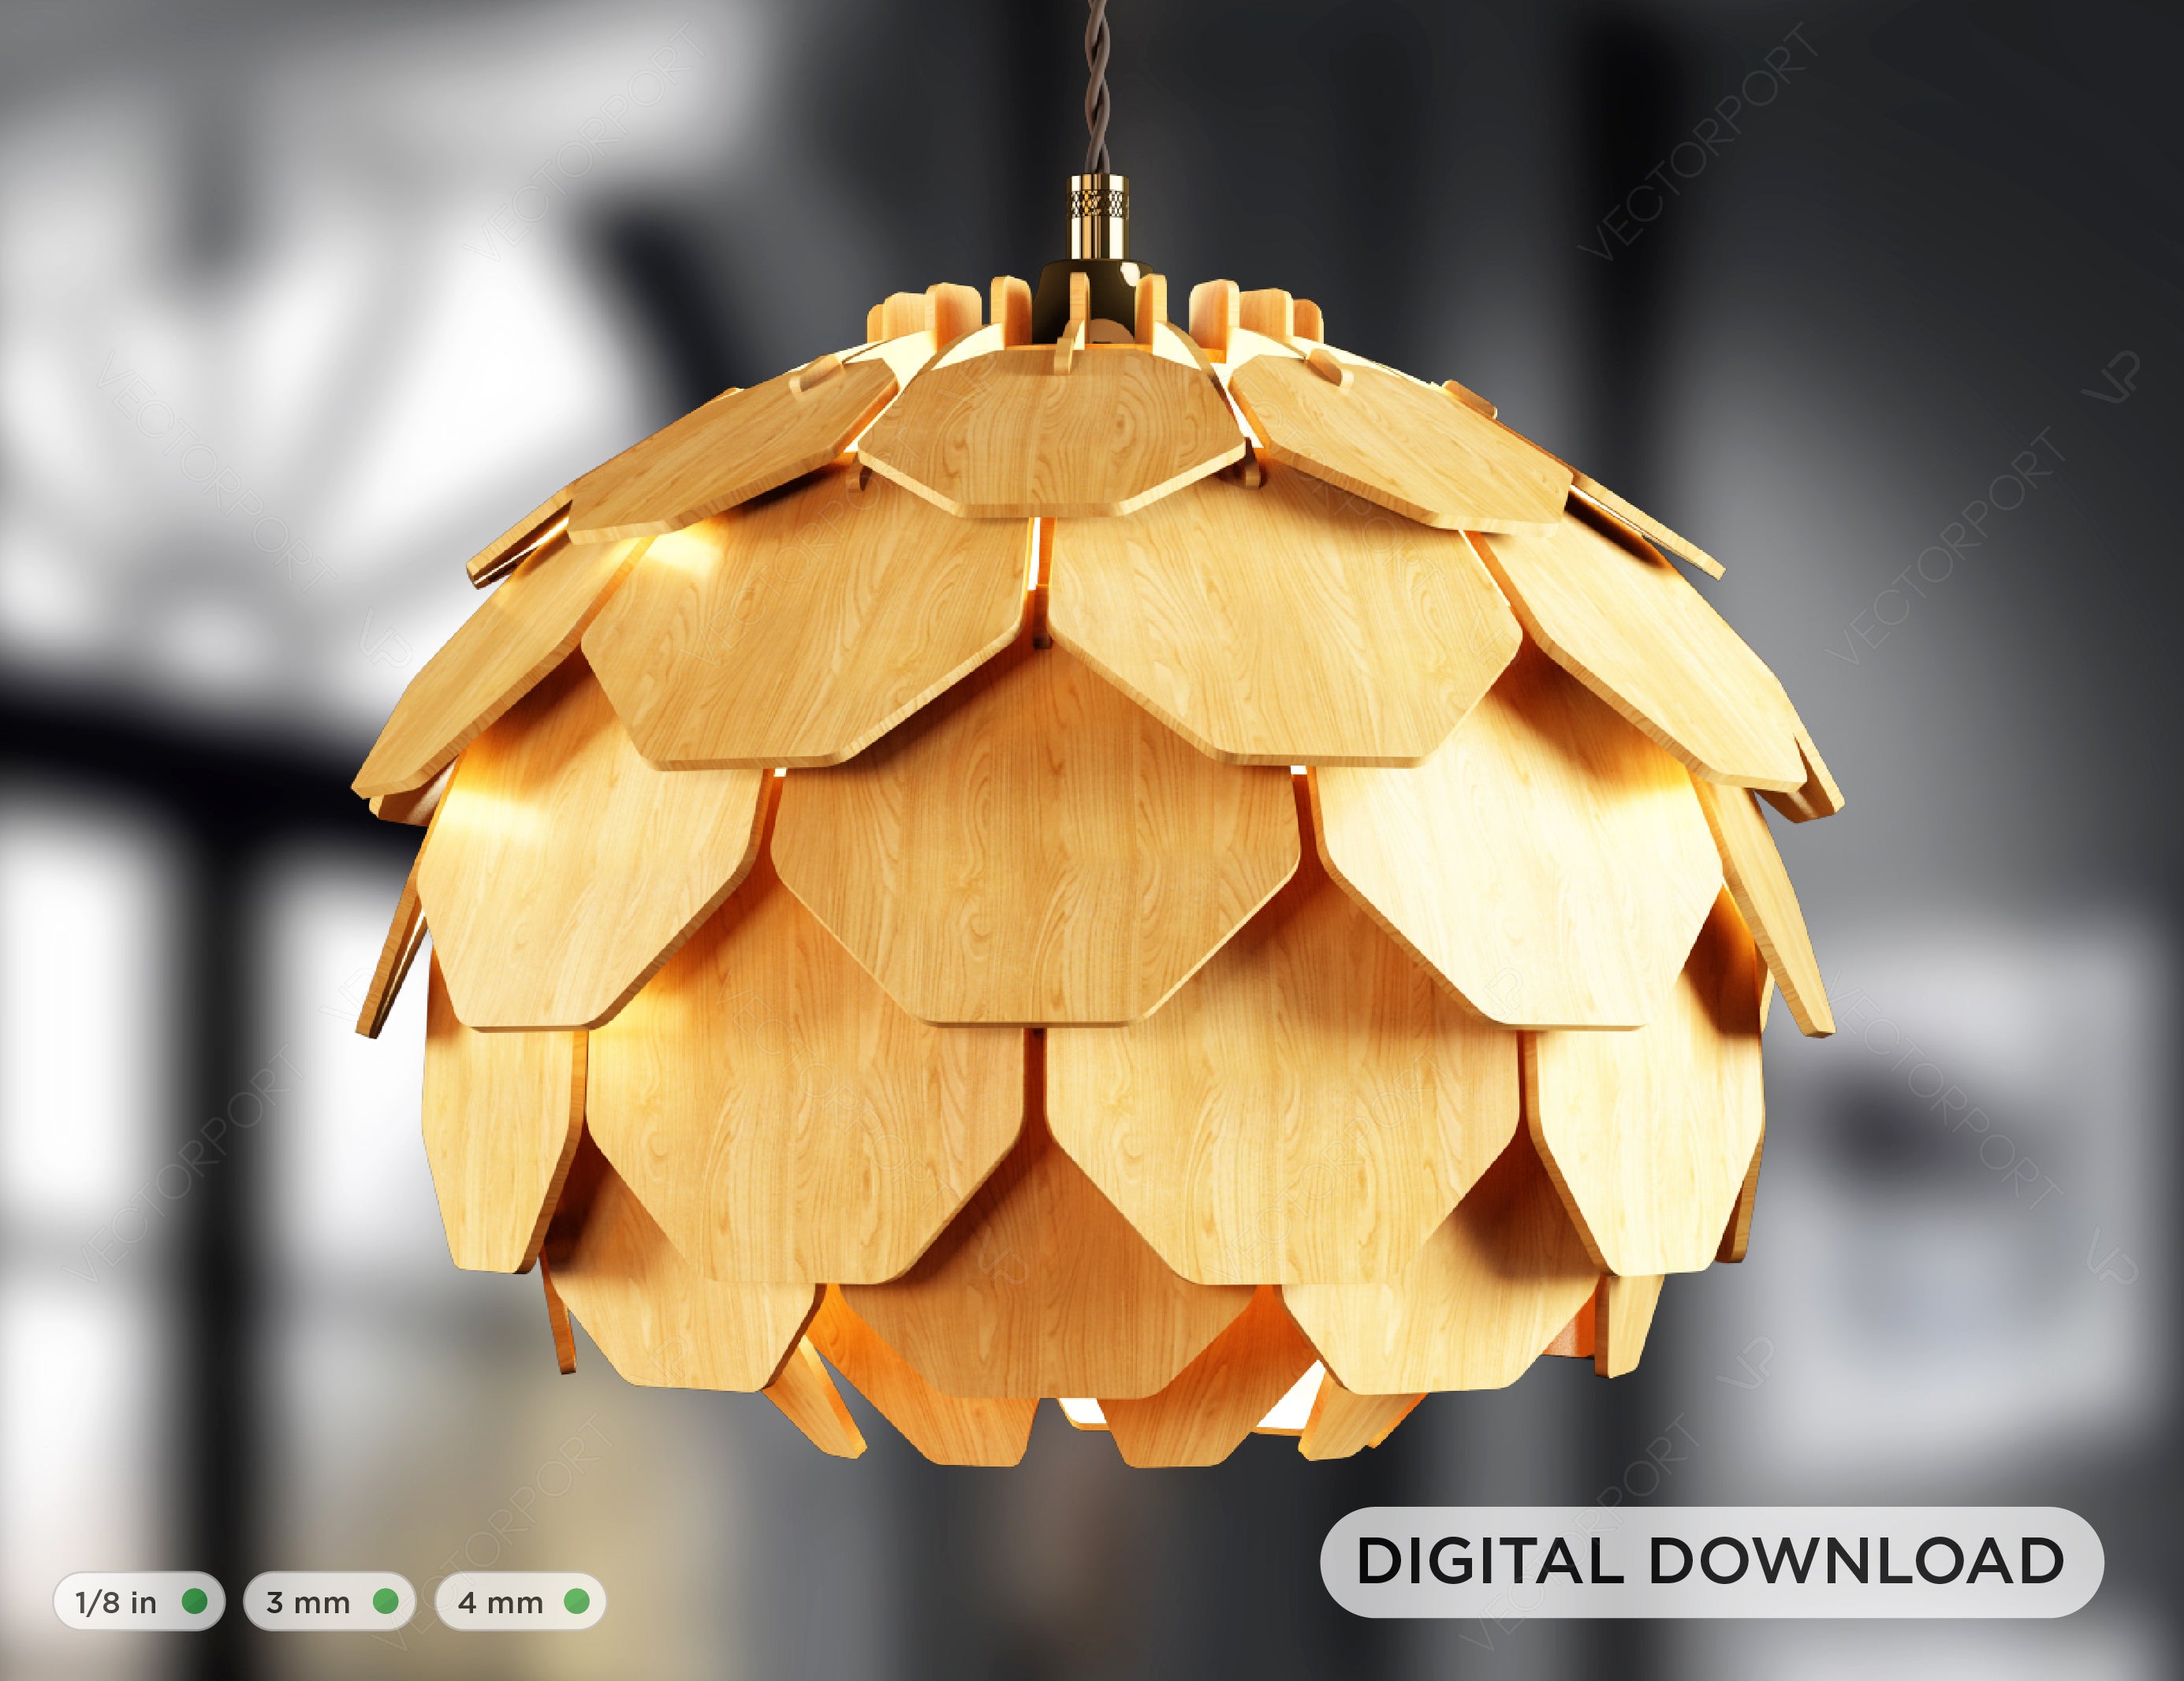 Scandinavian Pine Cone Hanging wooden chandelier lamp shade Pendant light template svg laser cut 1/8 inch plywood| SVG, DXF, AI |#098|